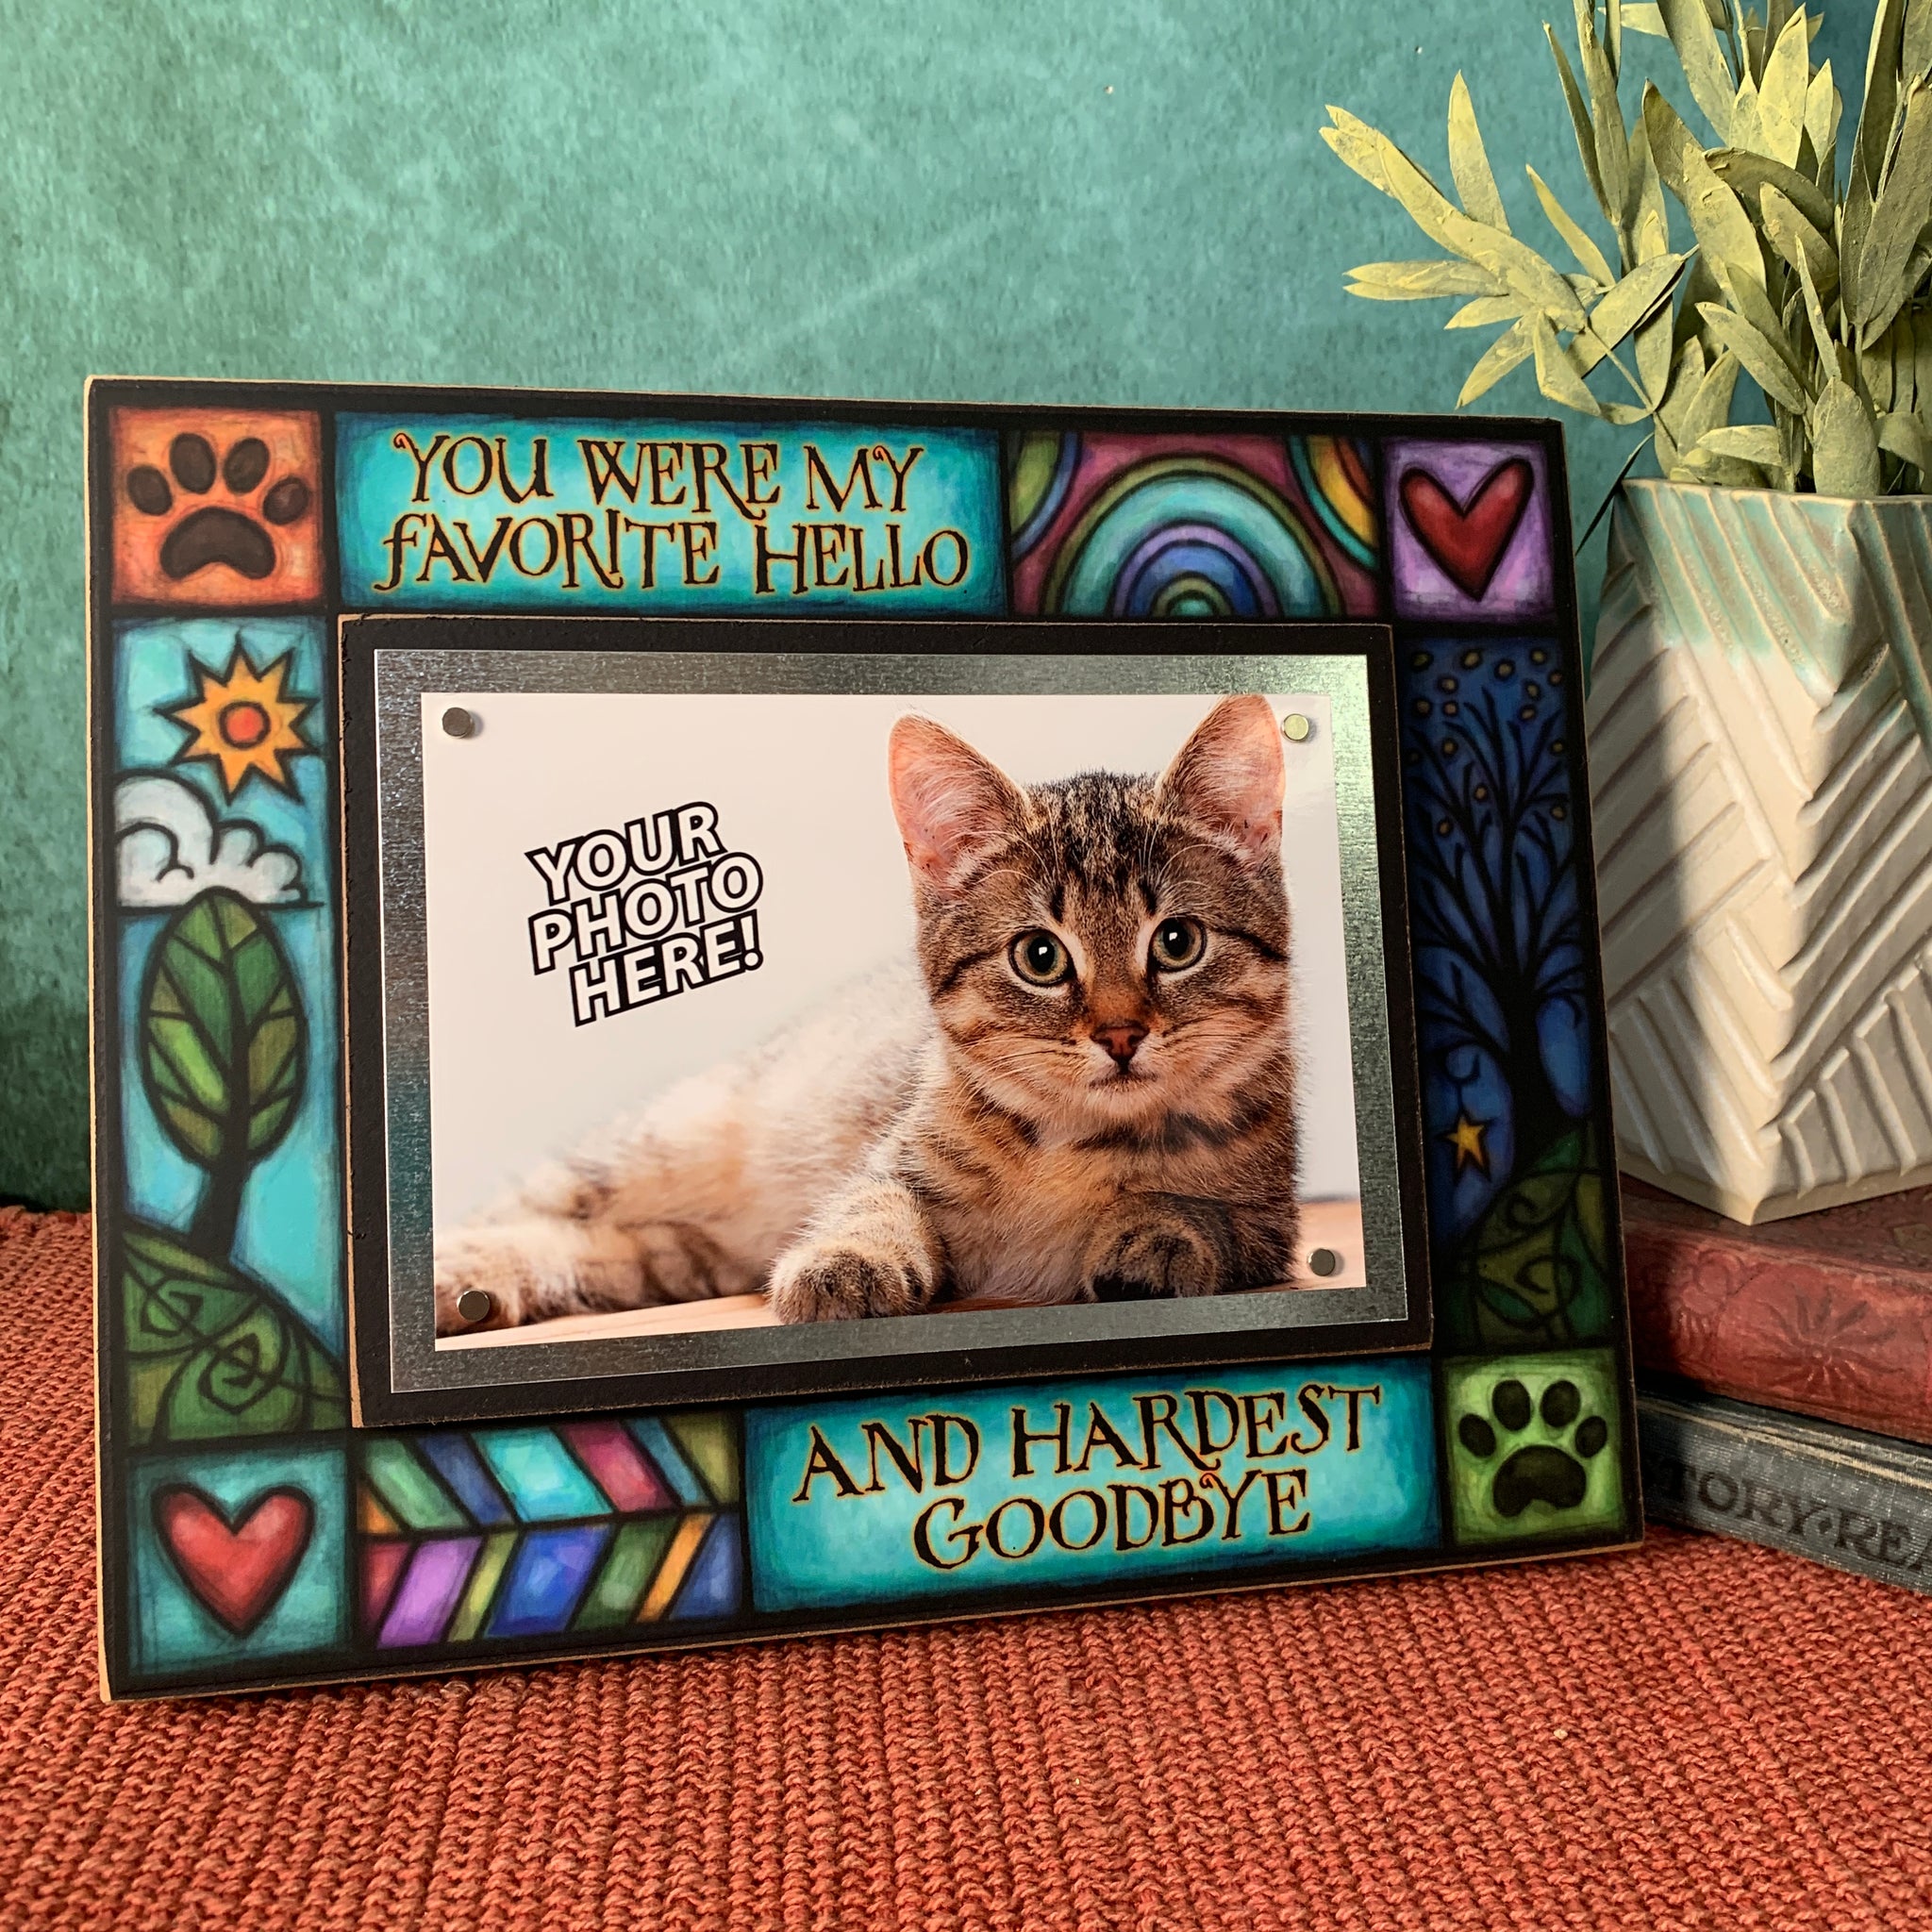 Our Favorite Picture Frame Ideas